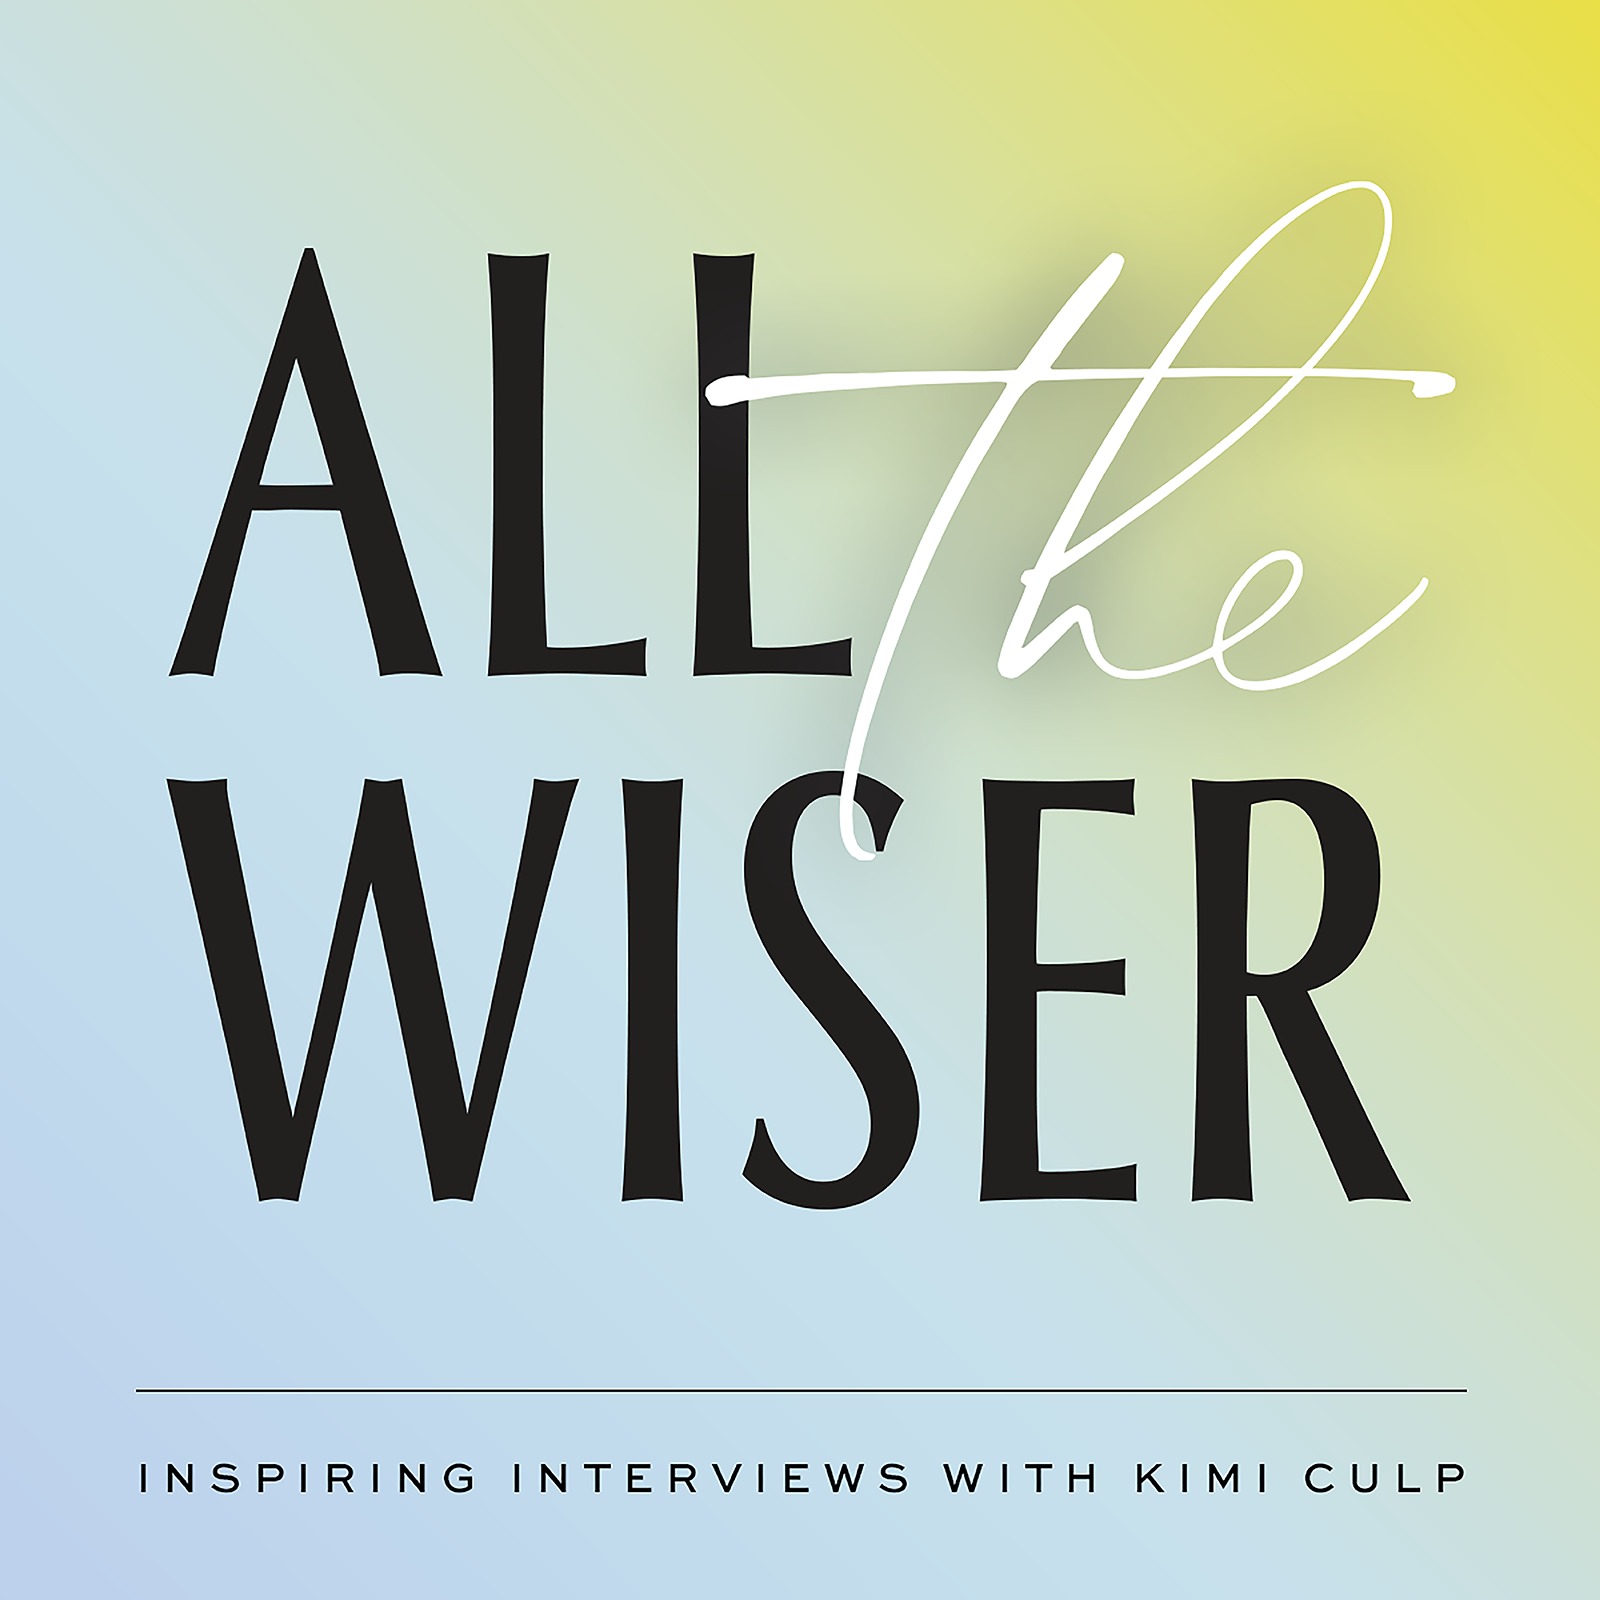 A Little Wiser: How Do You Want To Be Remembered?